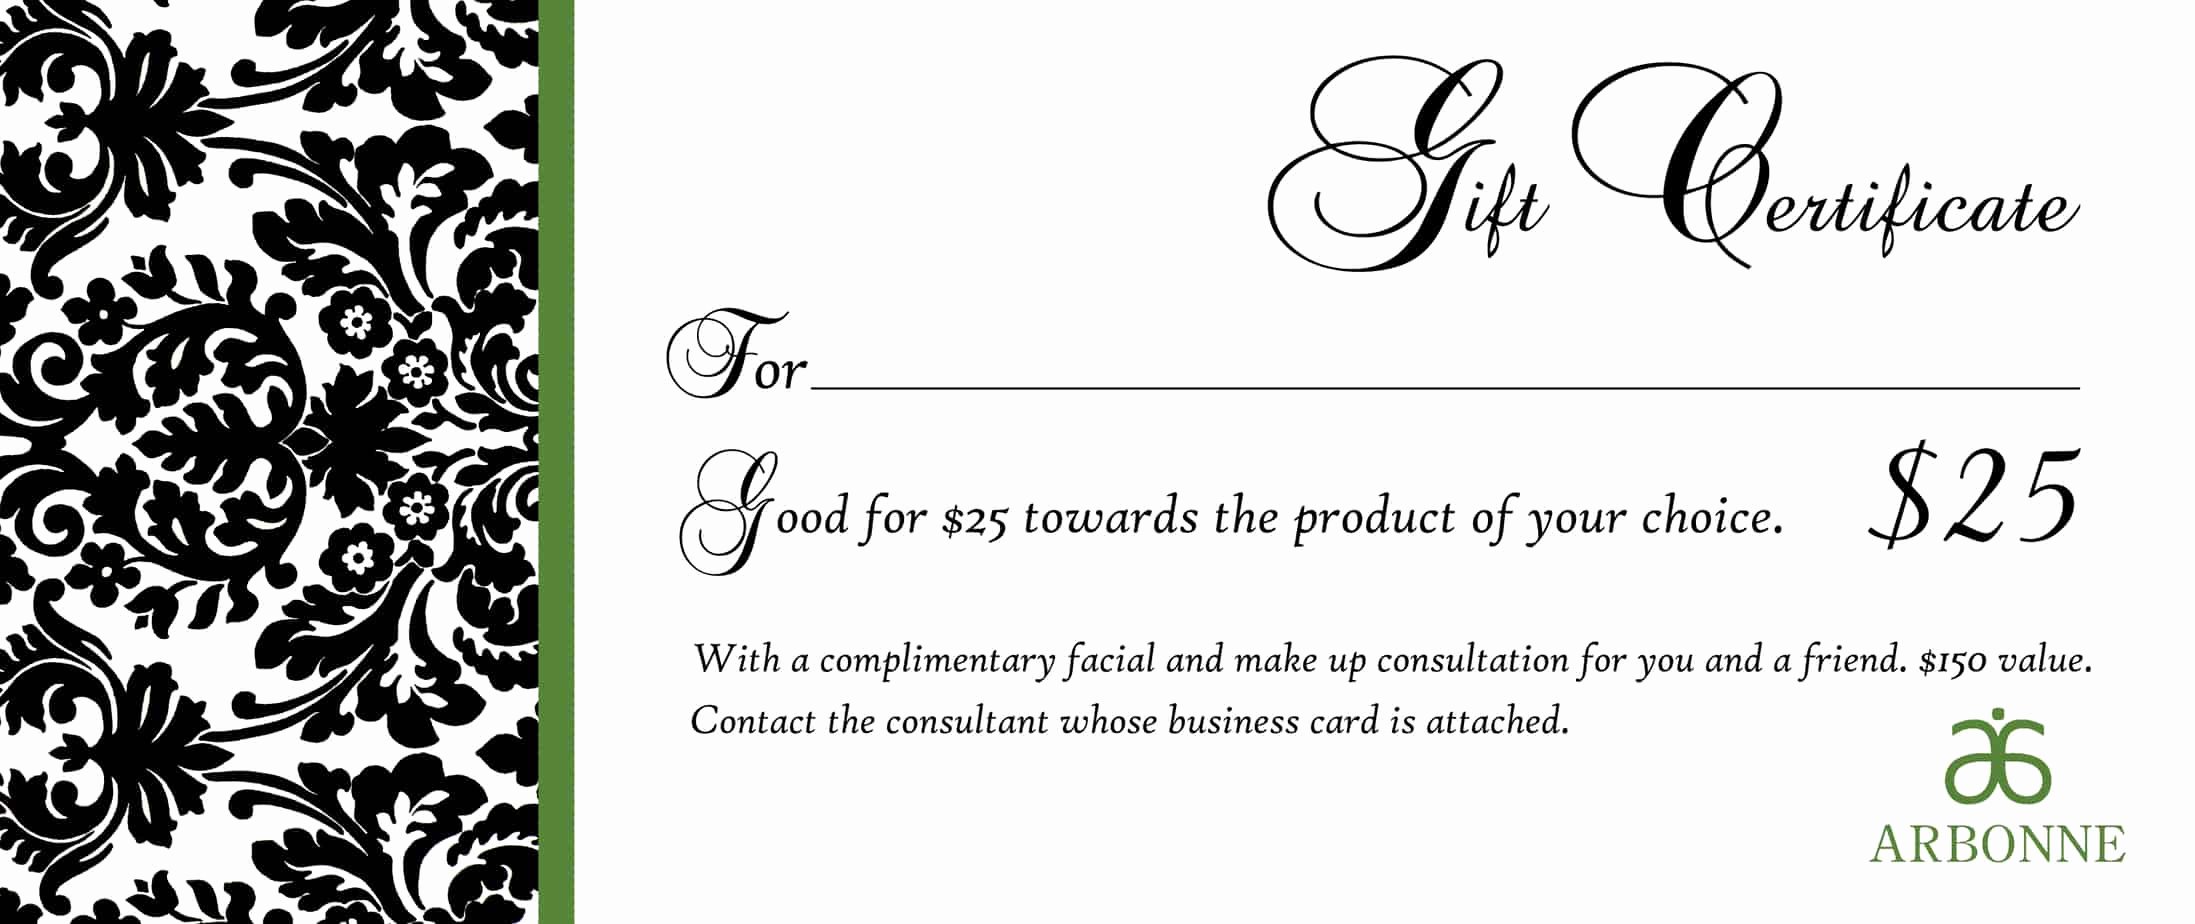 Samples Of Gift Certificate New 18 Gift Certificate Templates Excel Pdf formats